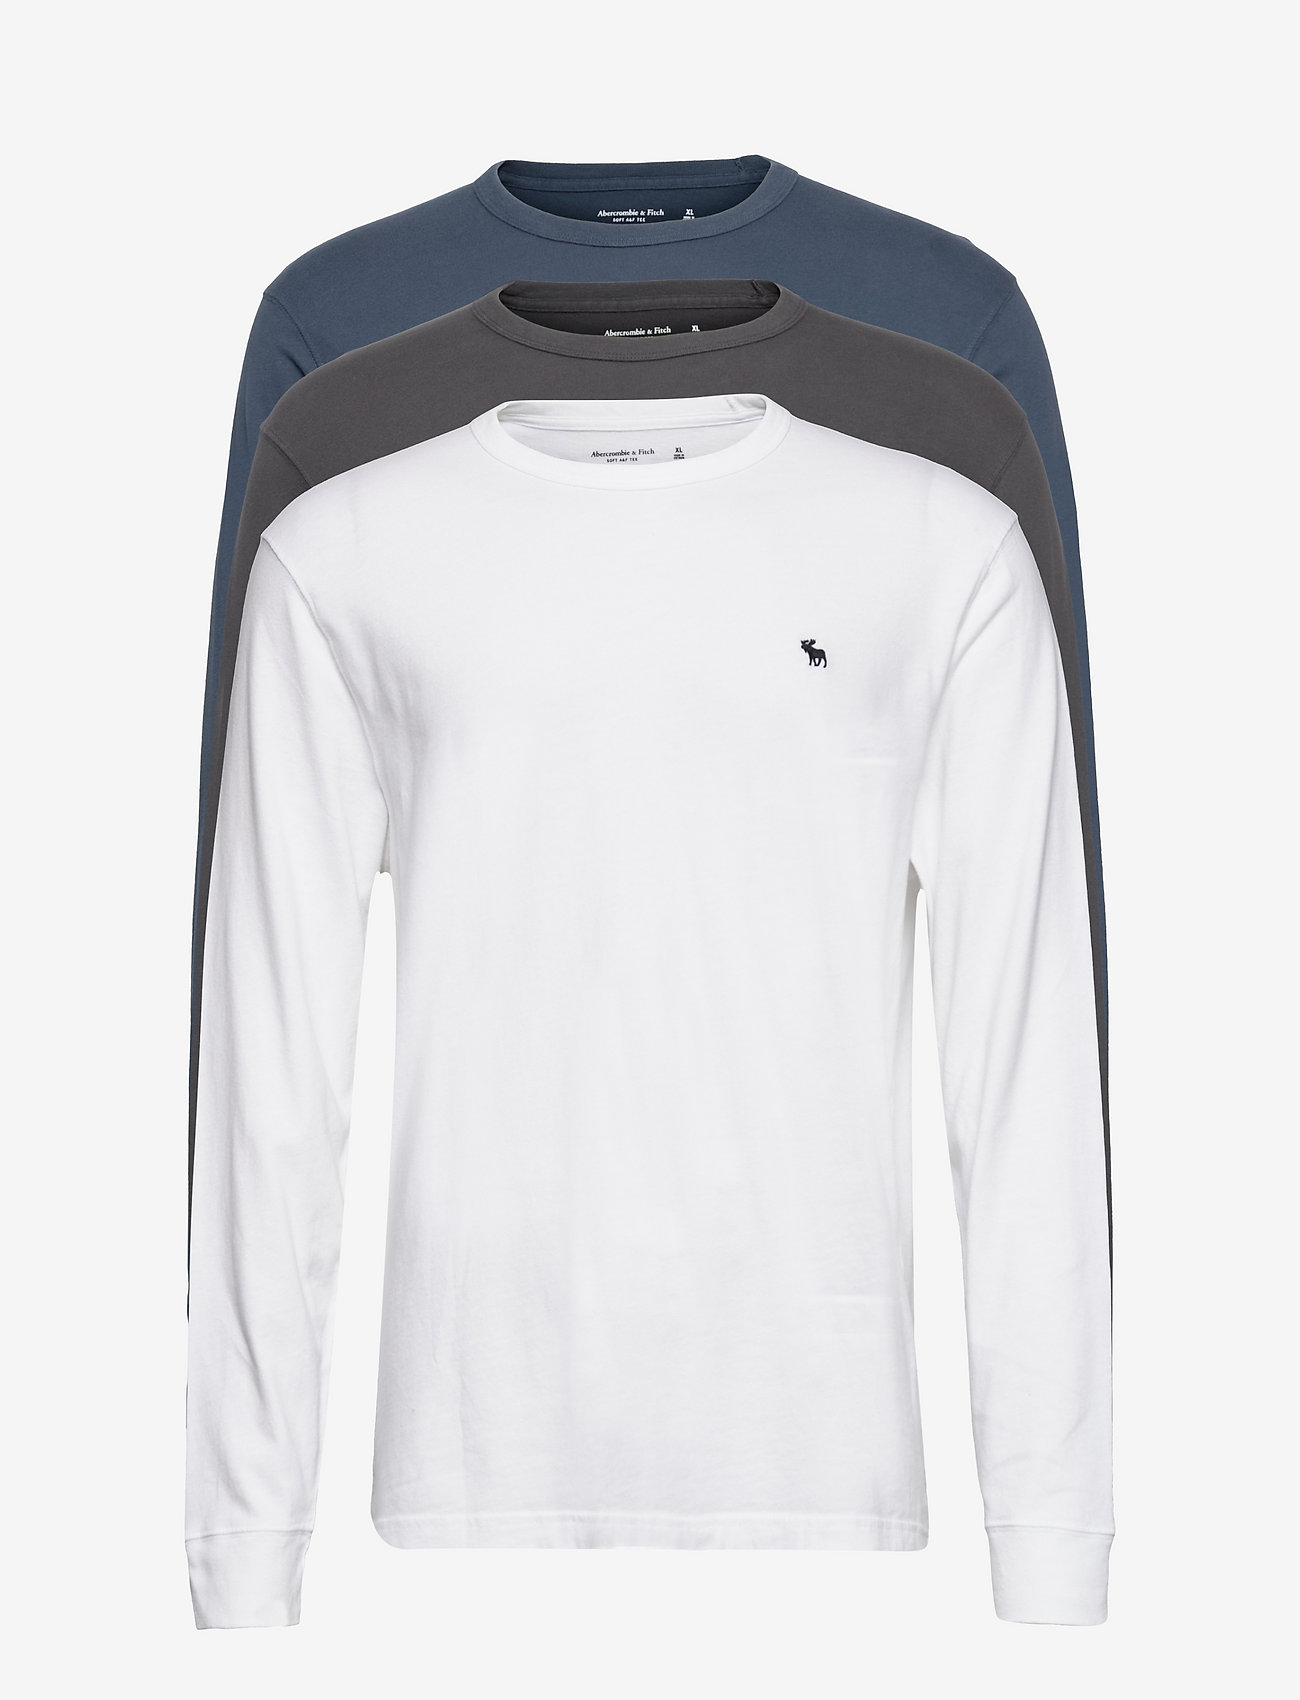 Abercrombie & Fitch Anf Mens Knits - Long-sleeved t-shirts | Boozt.com